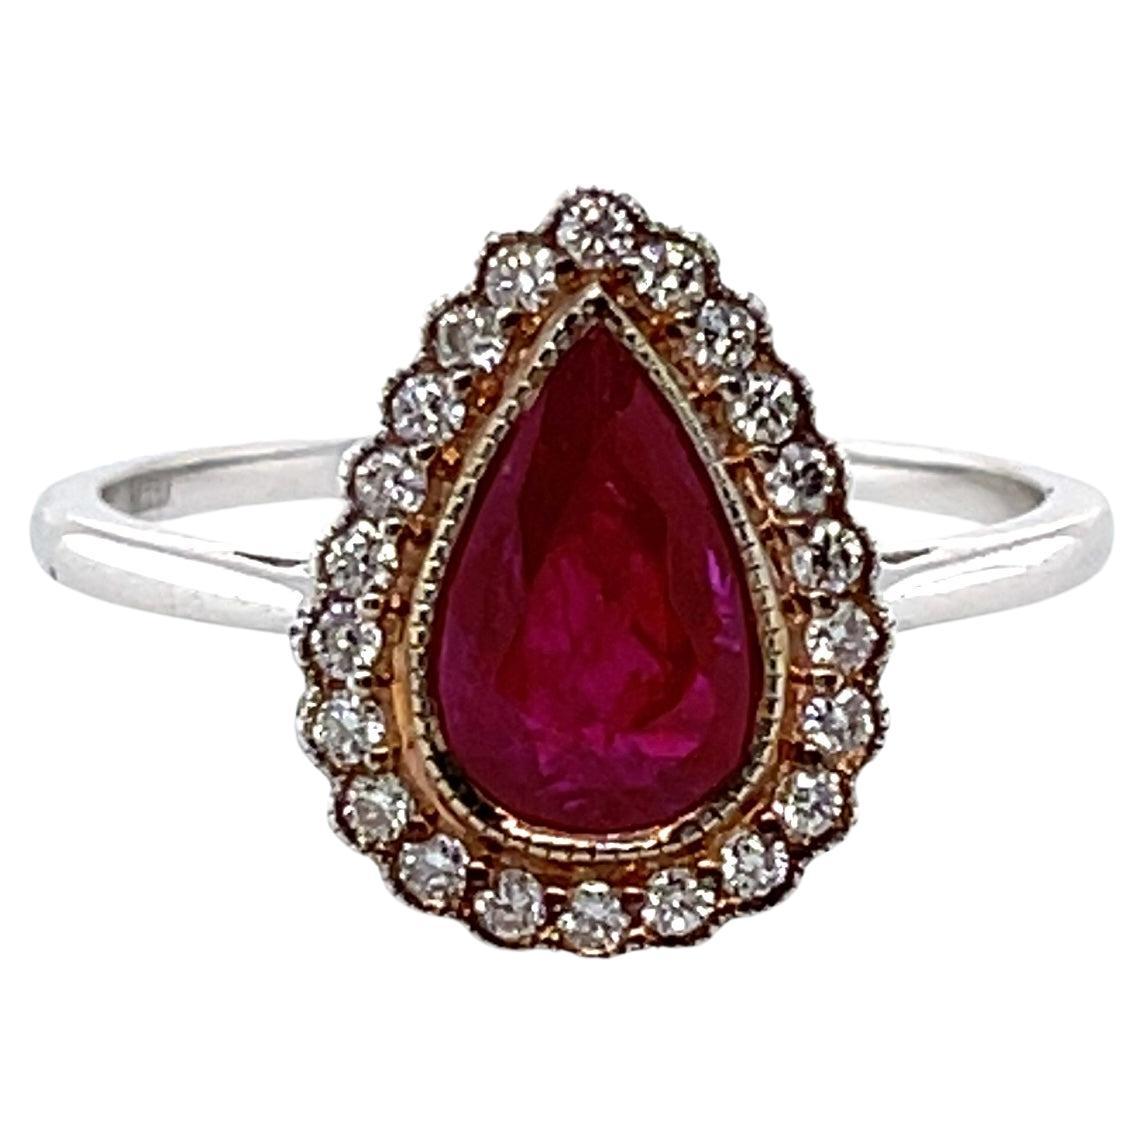 Imperial Jewels 18ct White and Rose Gold 'No Heat' Ruby and Diamond Ring